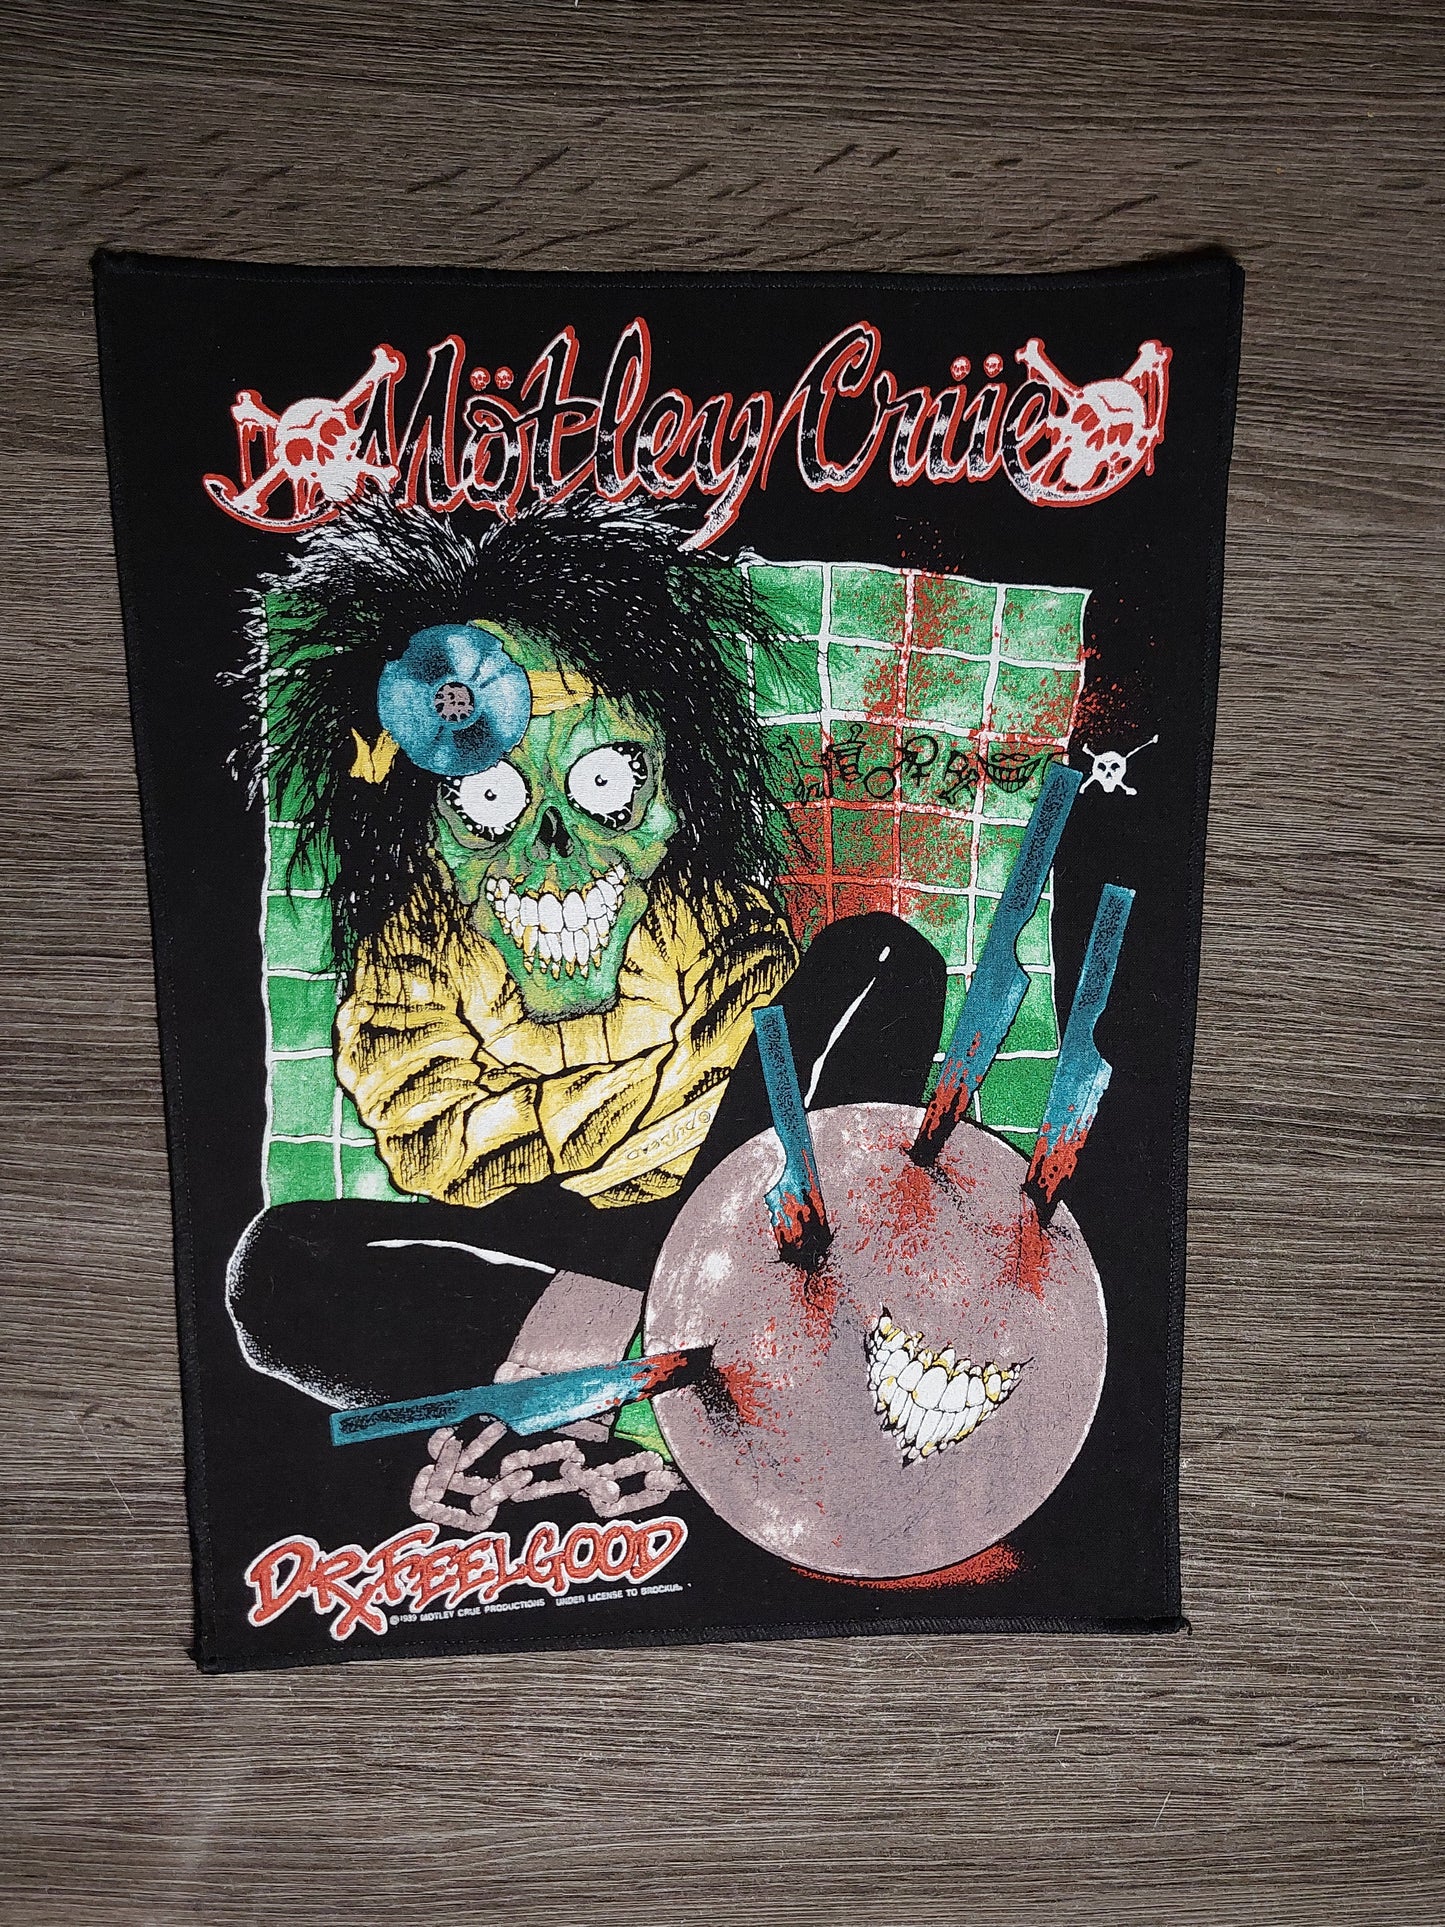 Motley Crue - Dr Feelgood backpatch